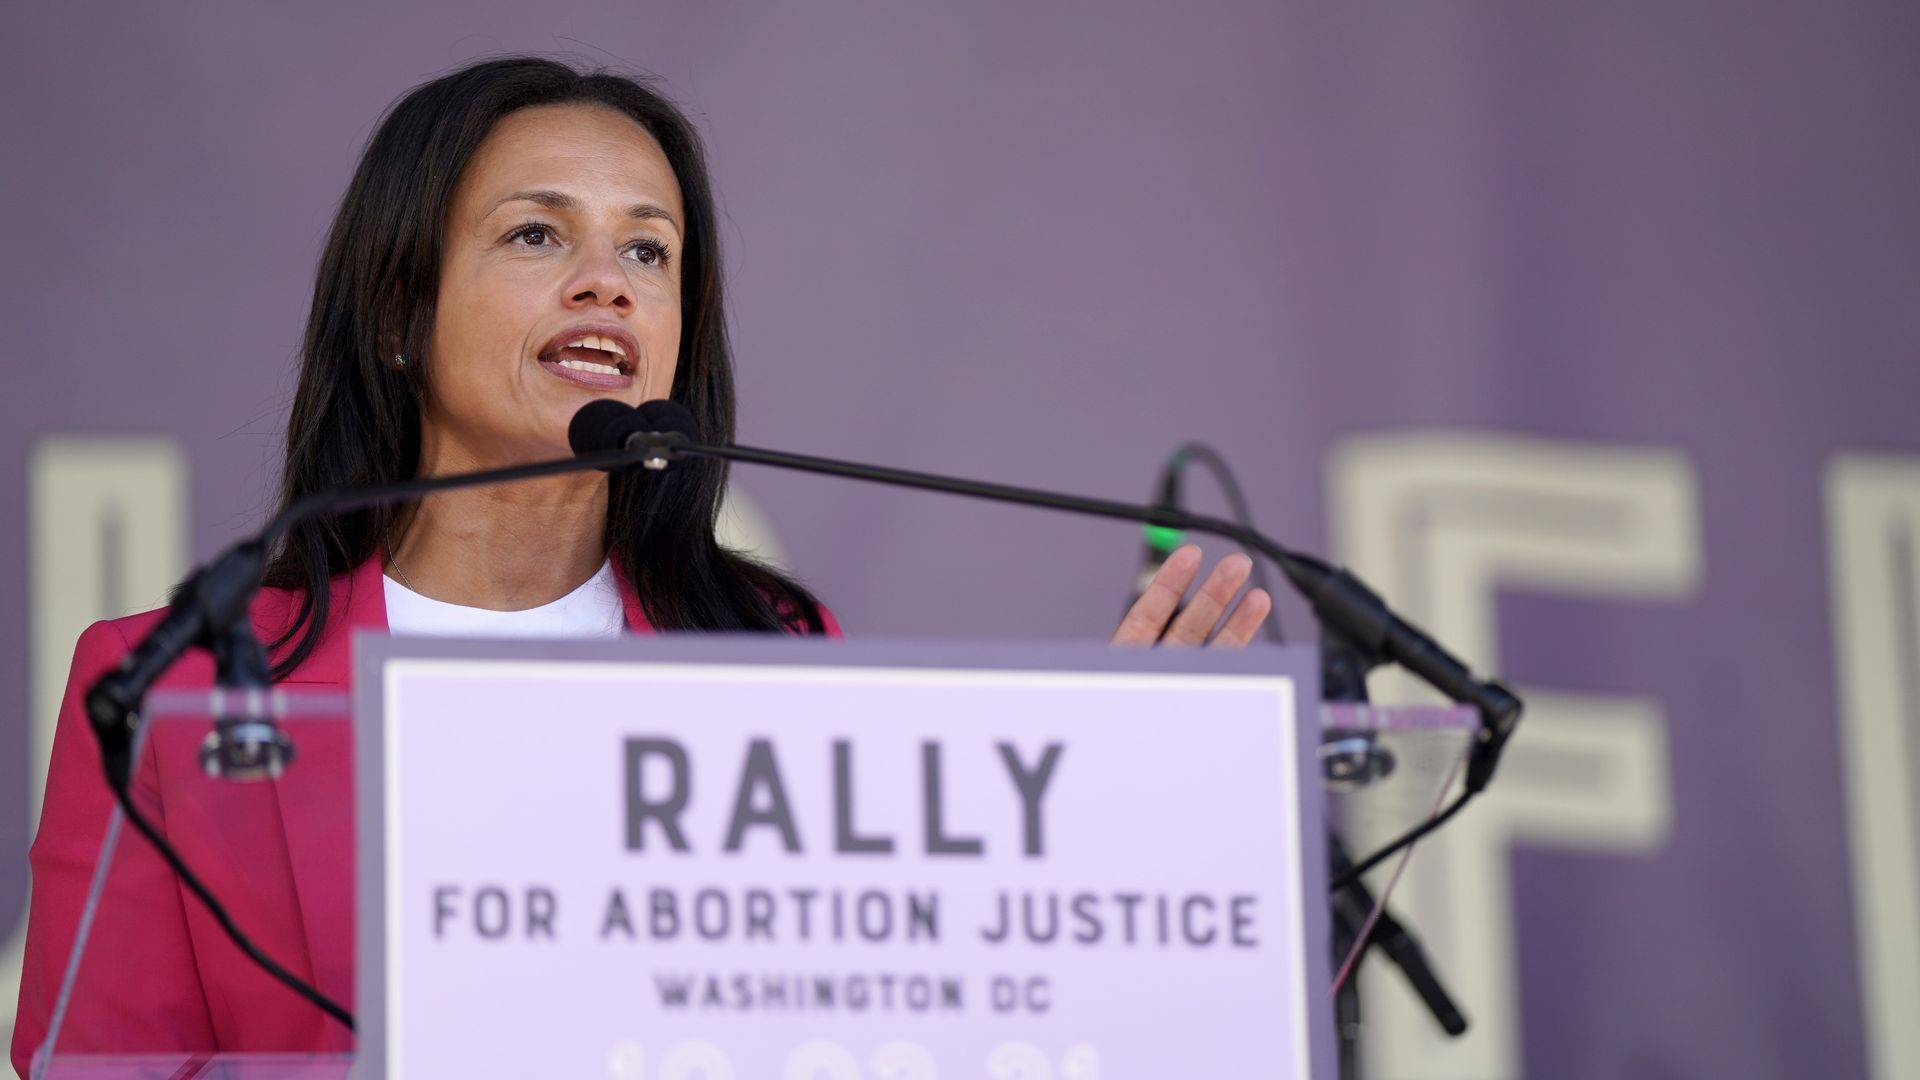 Planned Parenthood's Alexis McGill Johnson is seen speaking at an abortion rights rally in October.